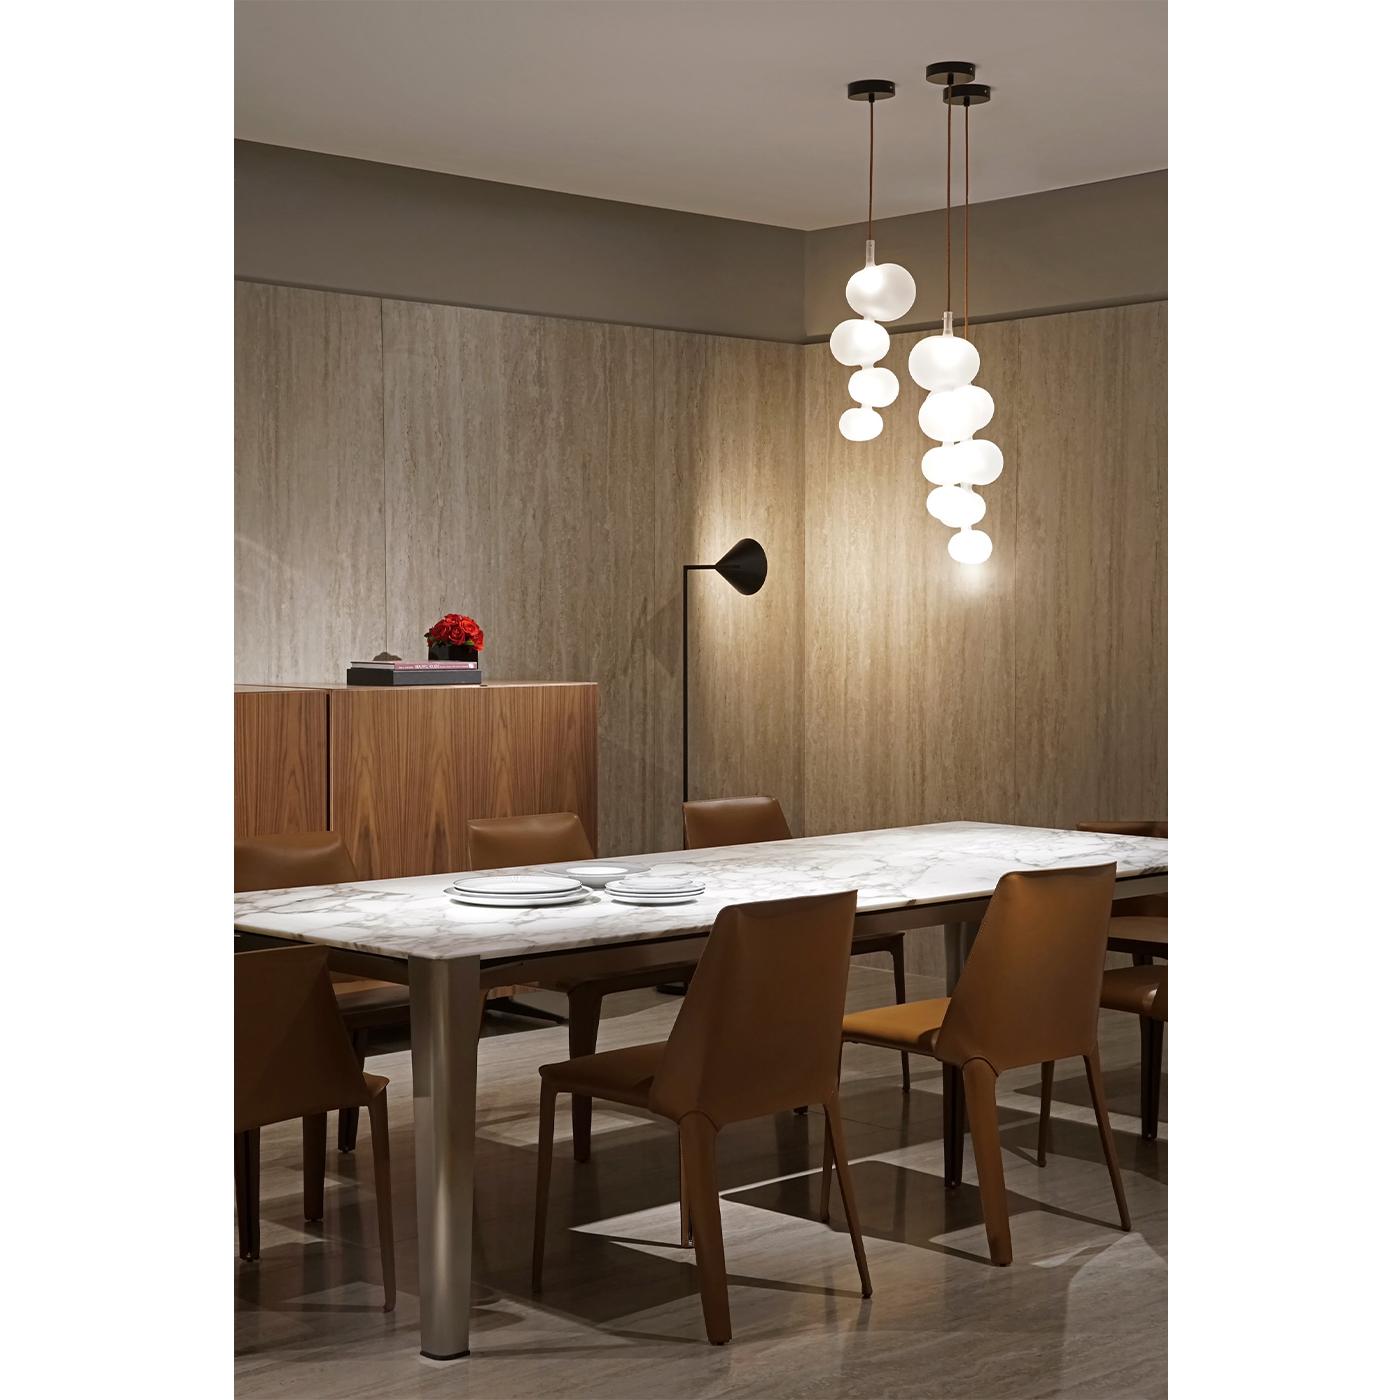 Italian Serendipity, Melogranoblu, Suspension Lamp, Frosted Glass For Sale